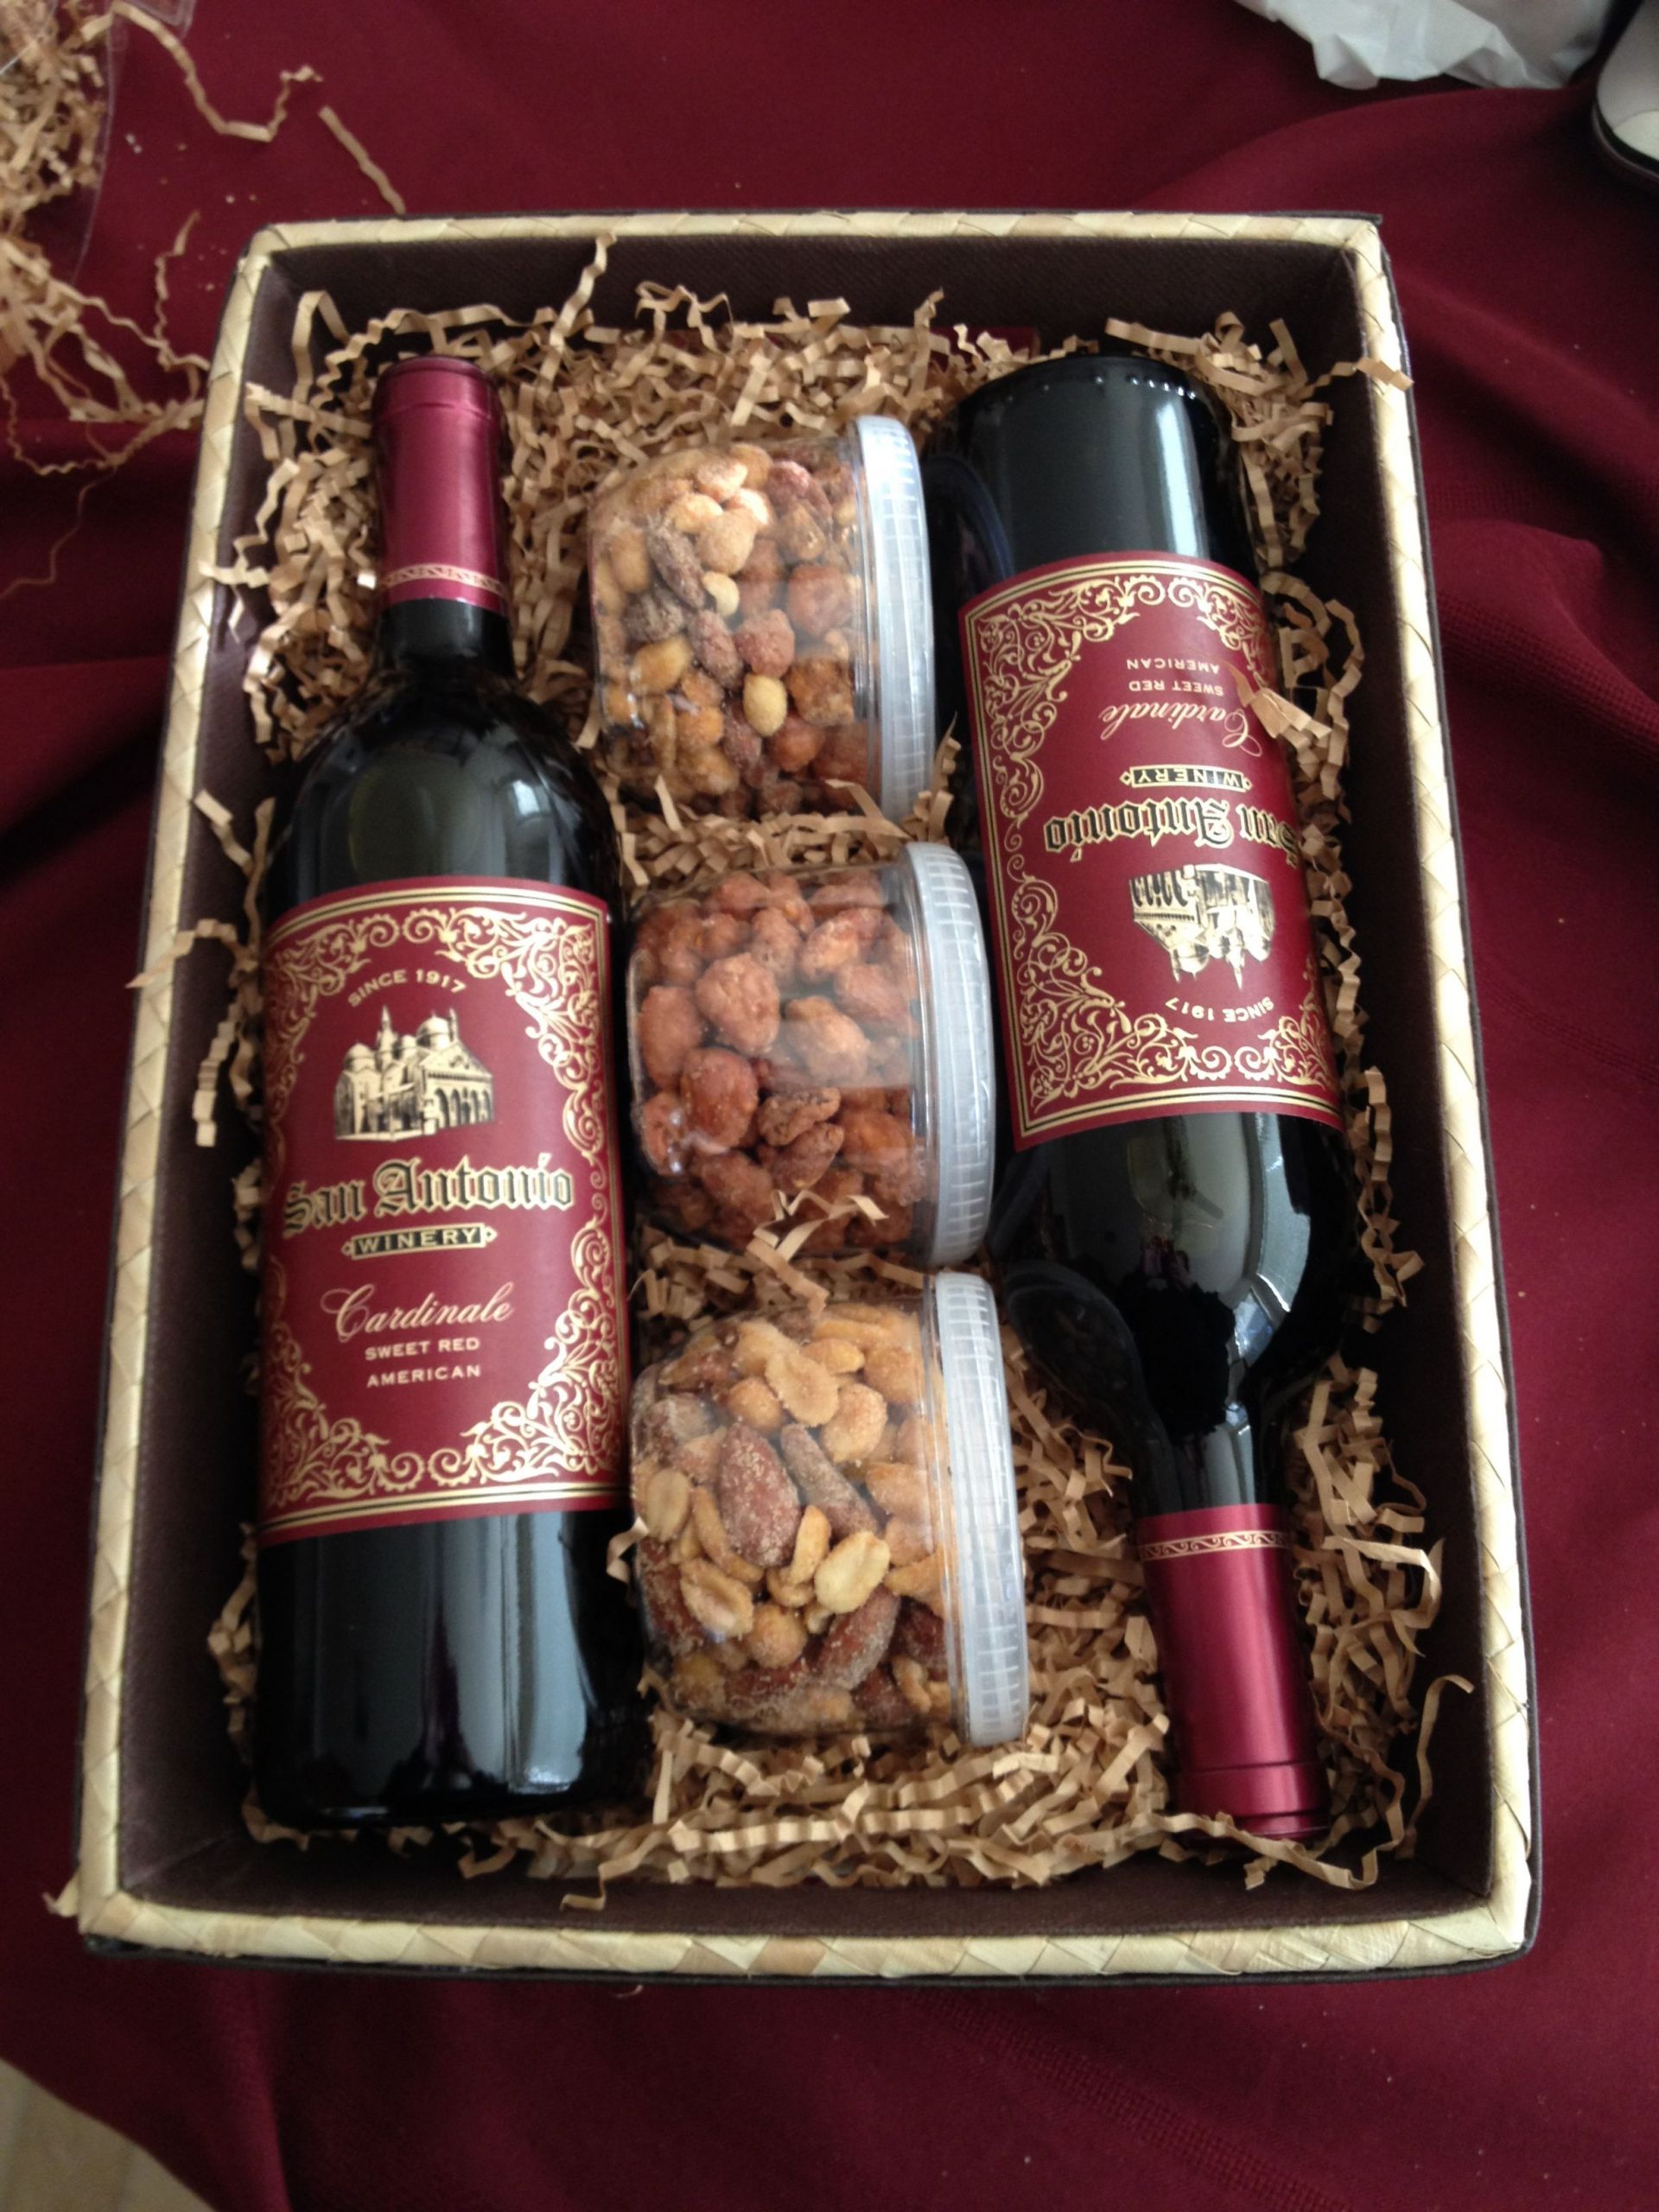 Wine Gift Basket Ideas To Make
 Wine Gift Basket Nuts are a good idea to add to the wine